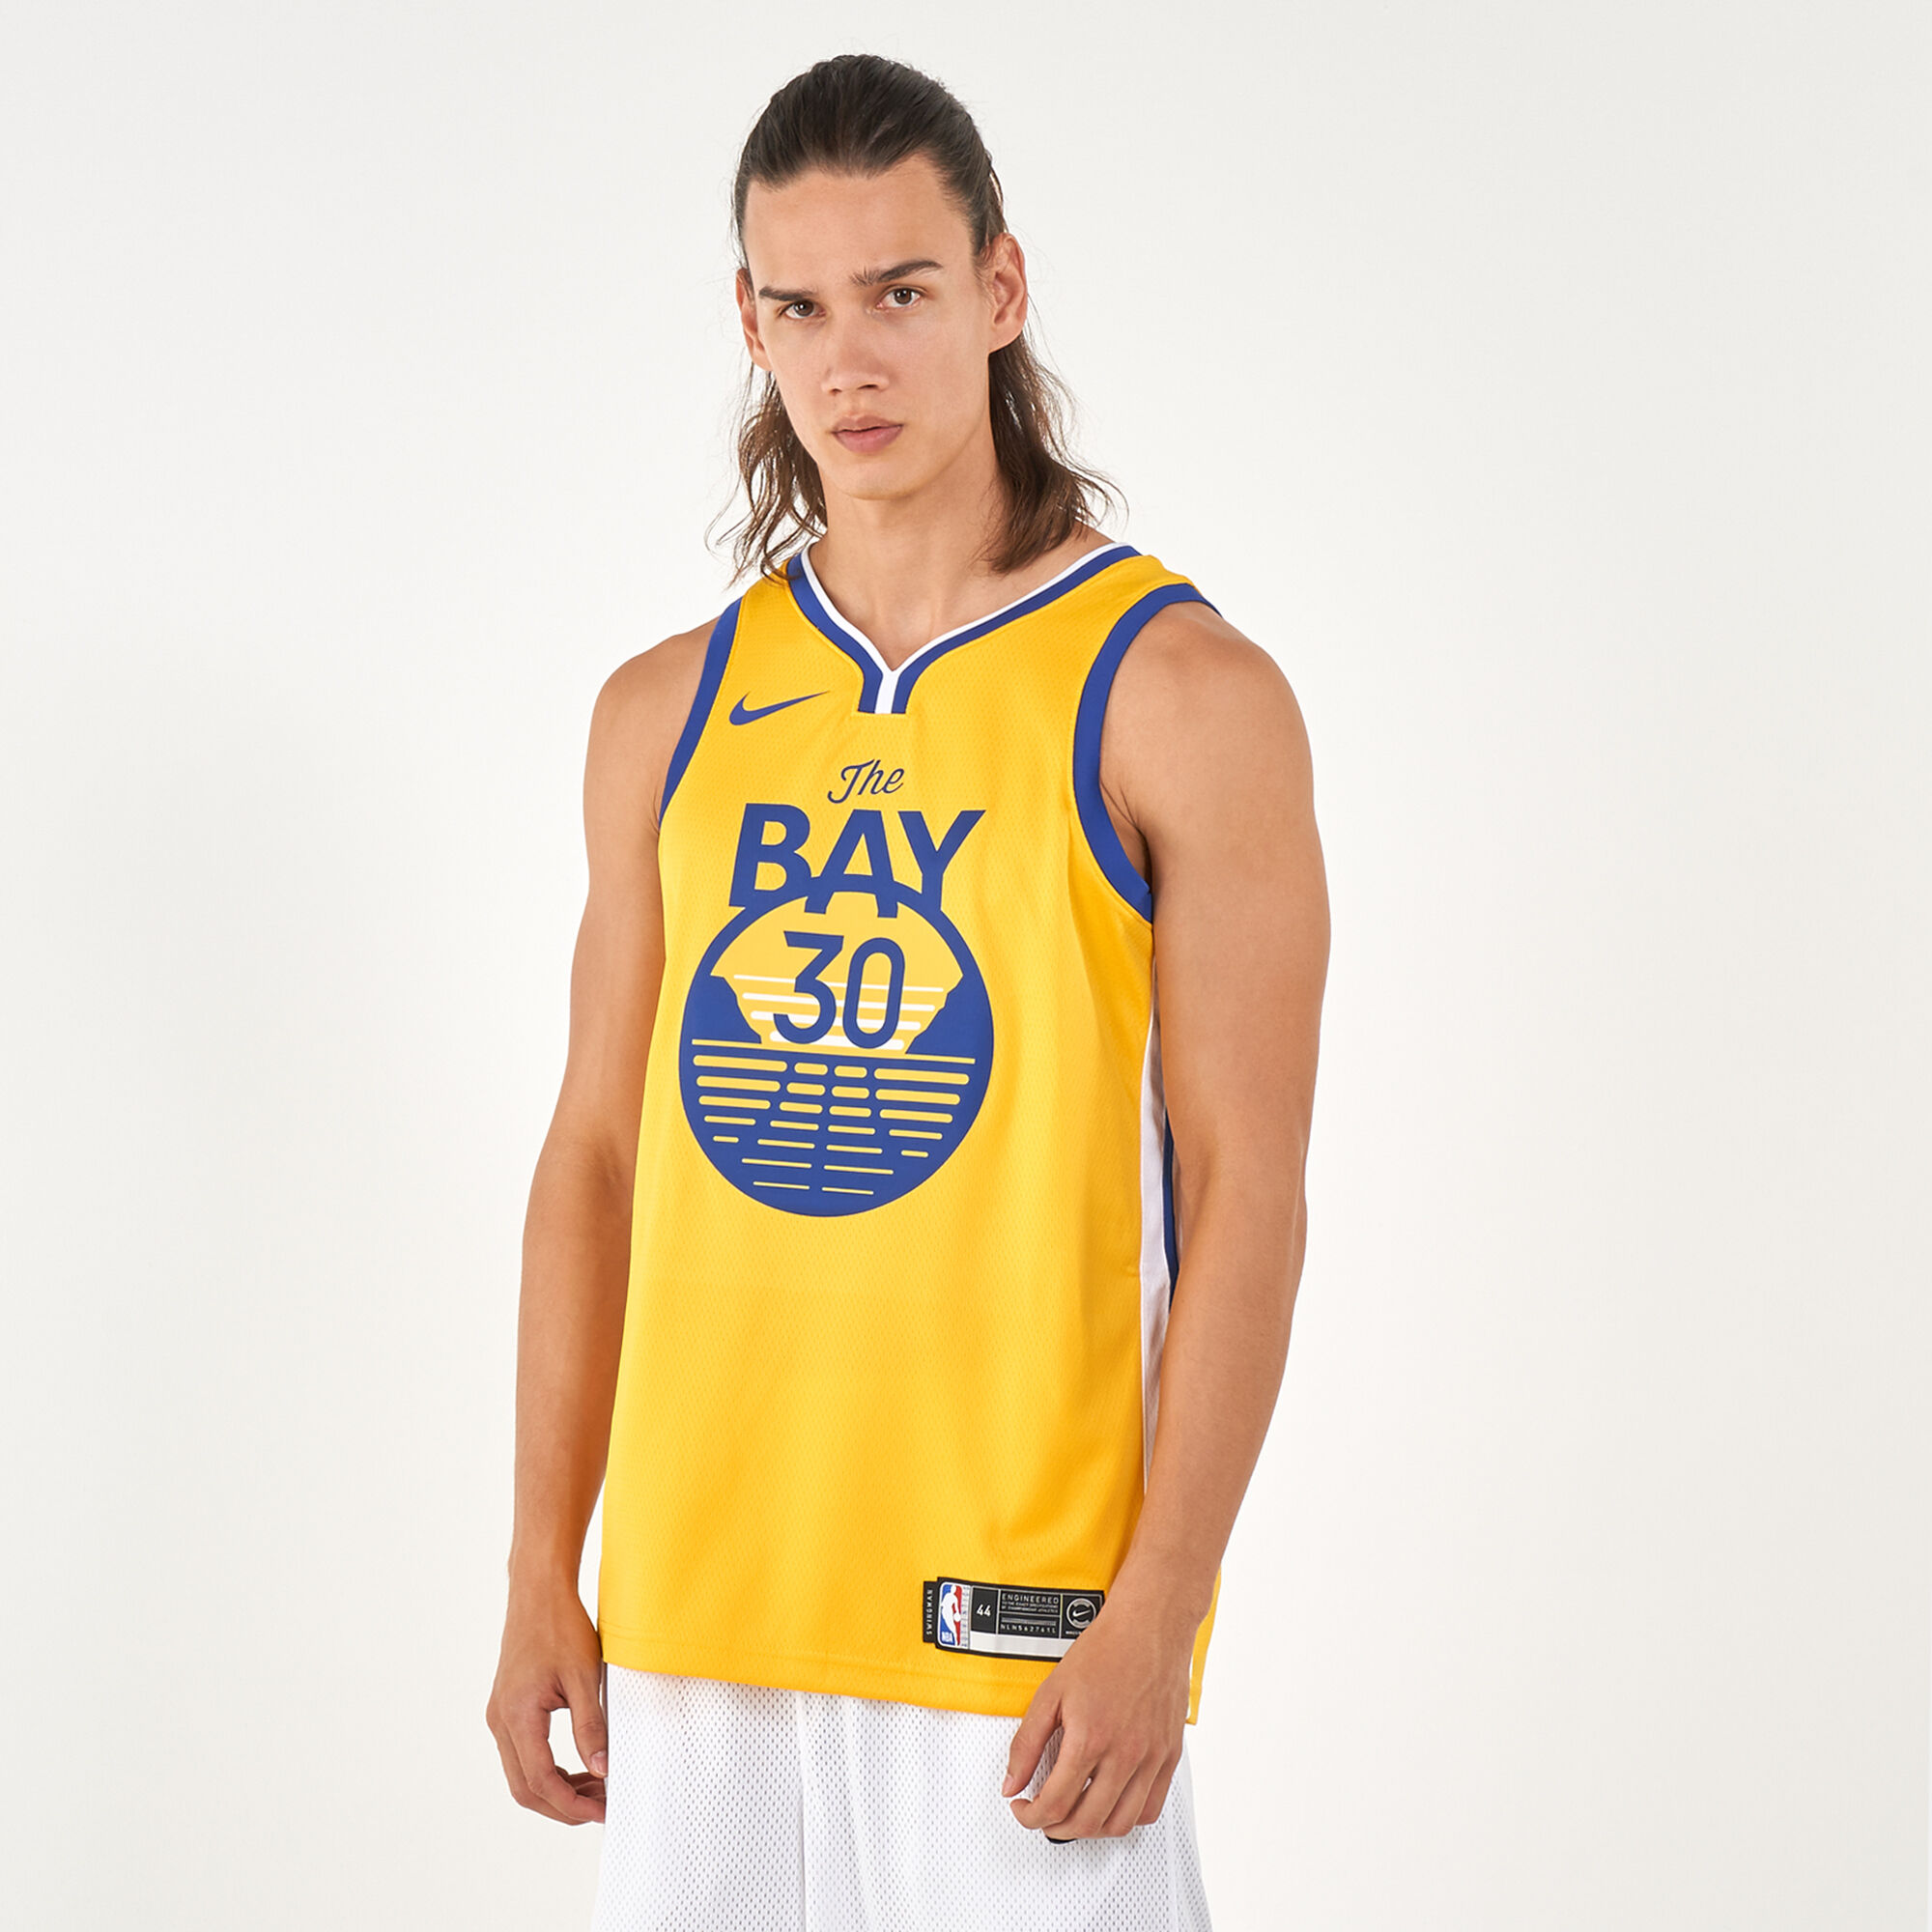 Steph Curry Golden State Warriors Statement Edition Nike Jersey